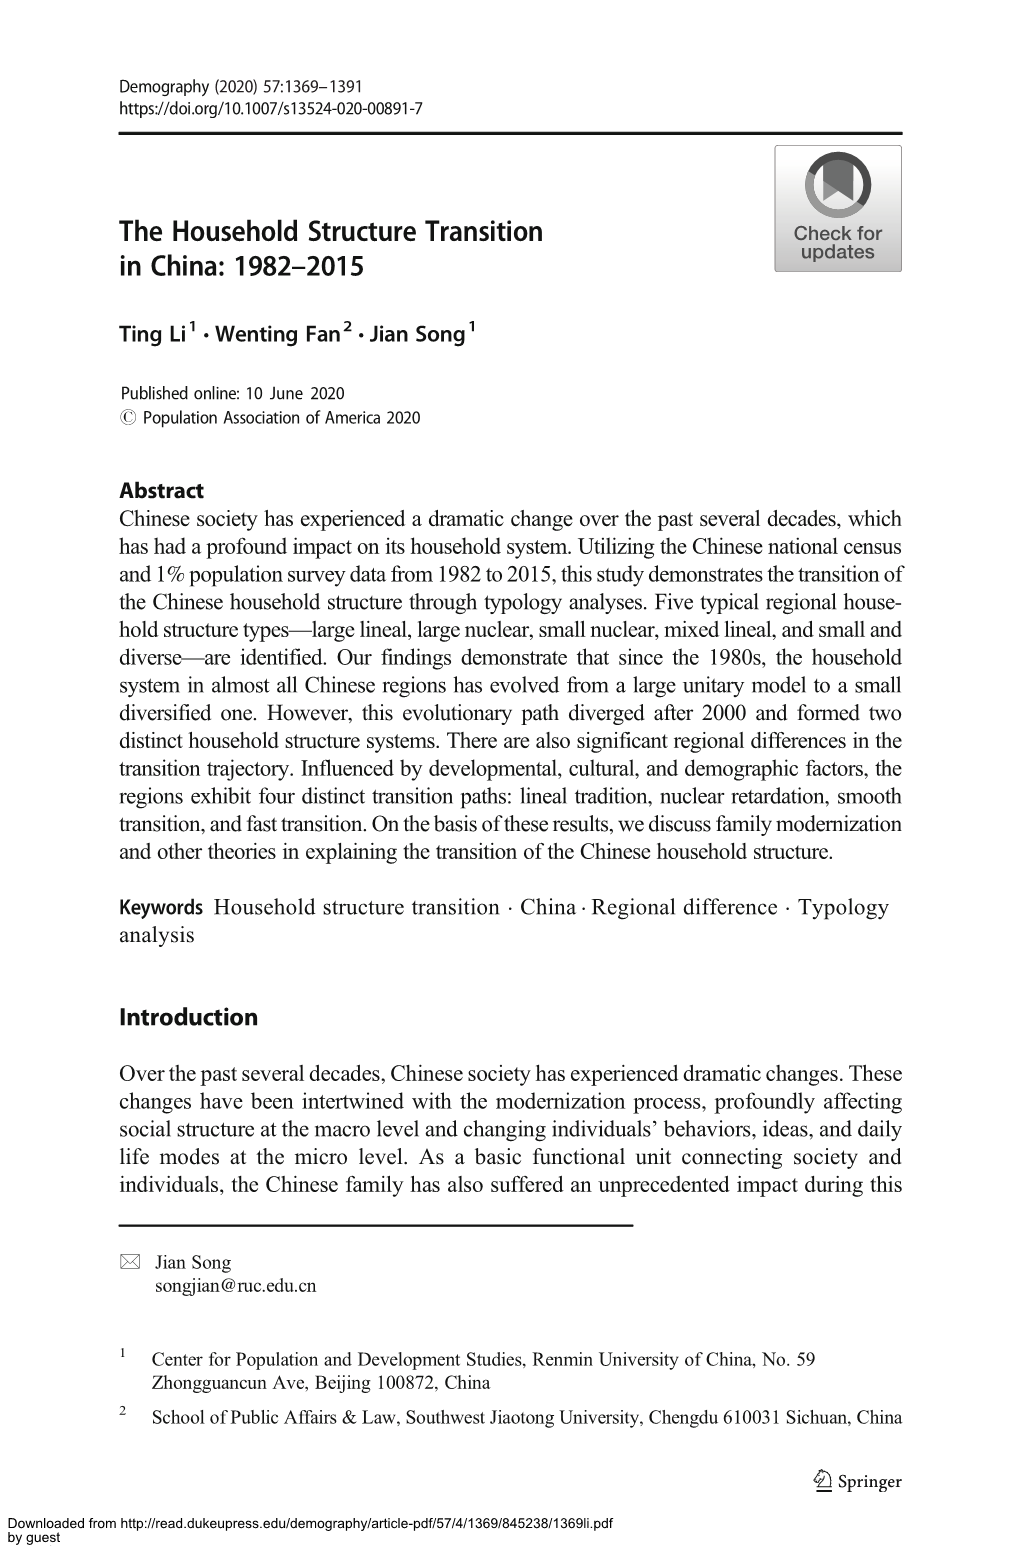 The Household Structure Transition in China: 1982–2015